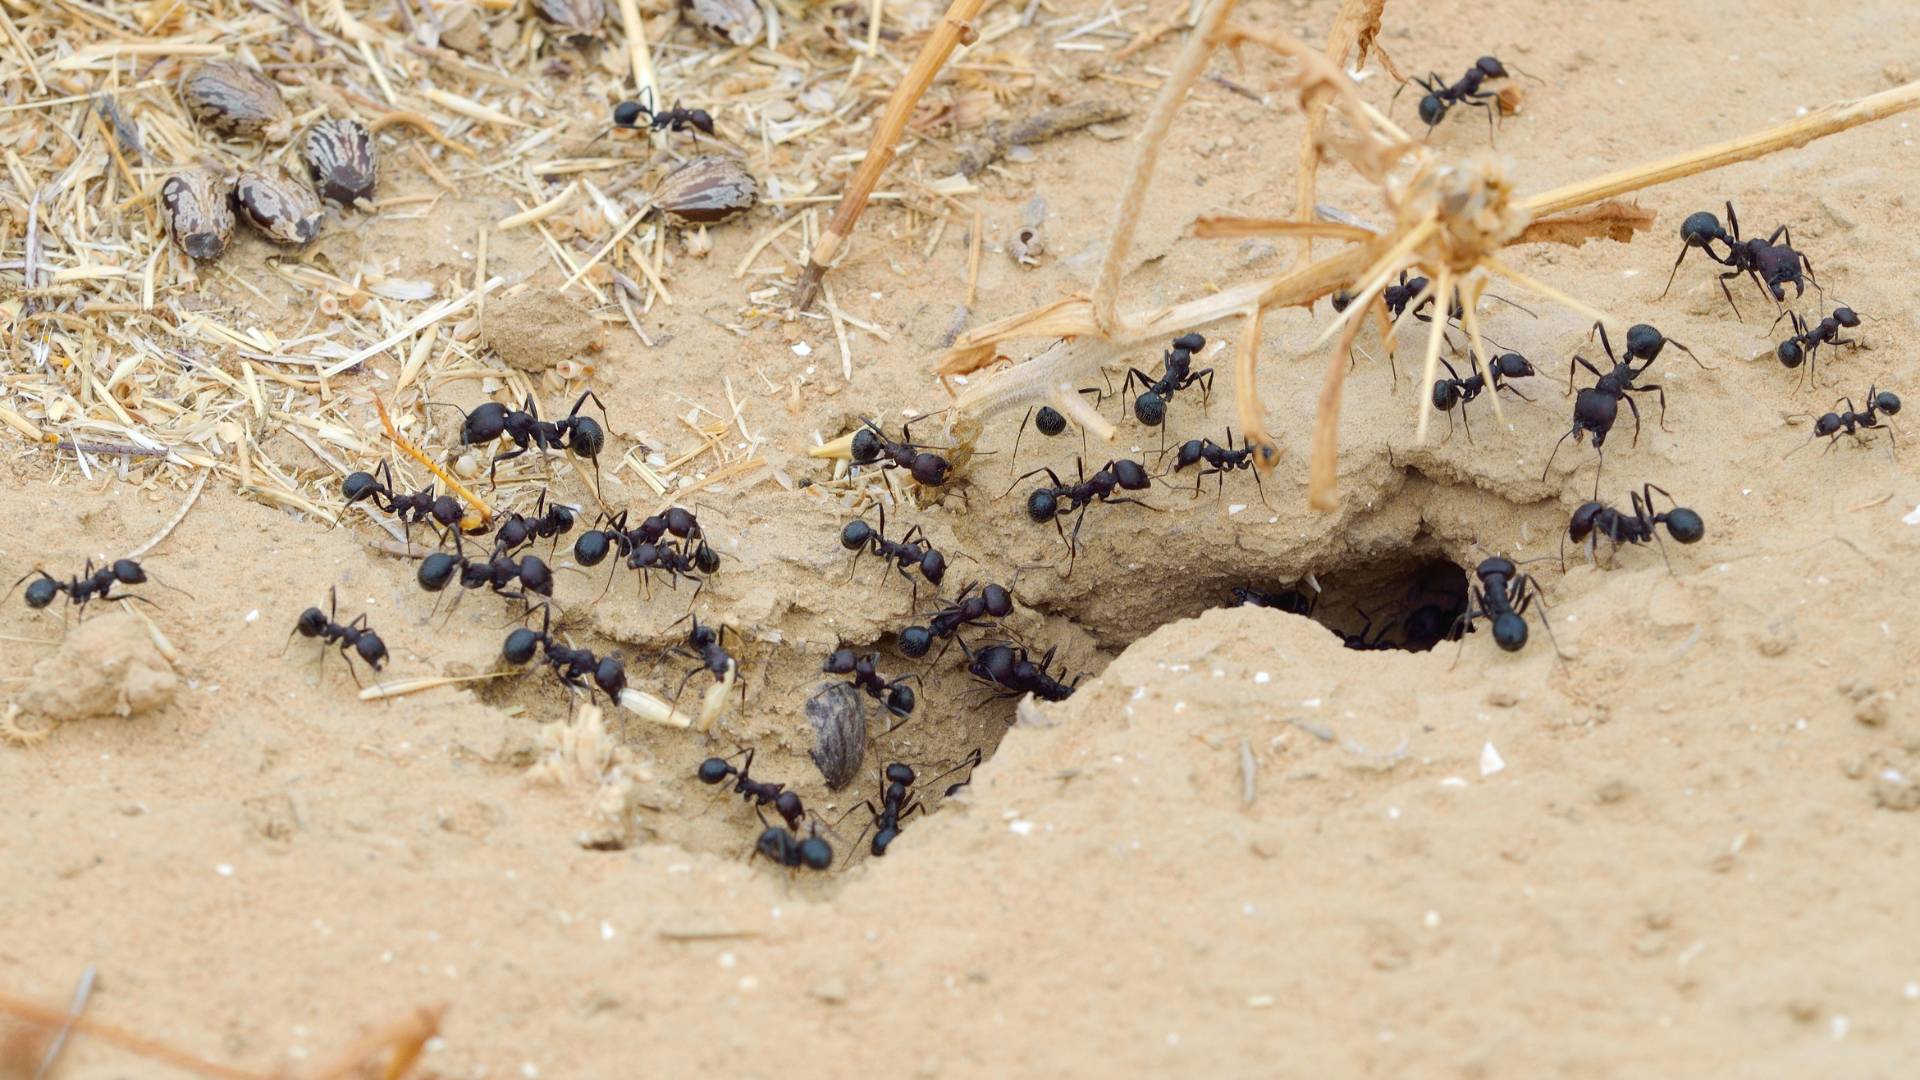 ants going into their colony